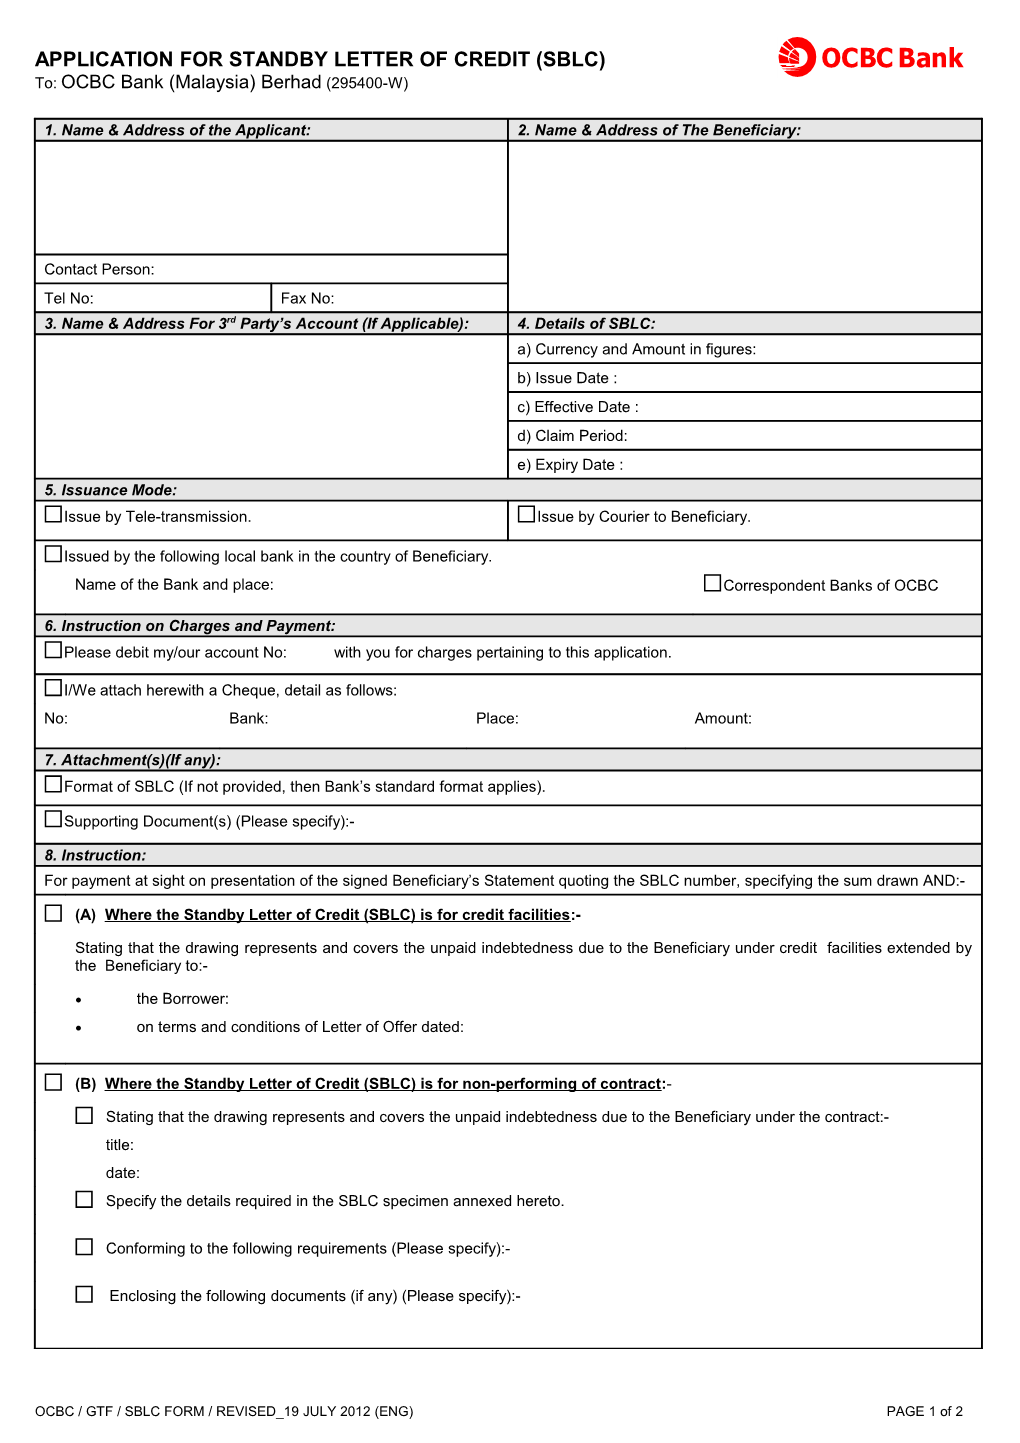 Application for Standby Letter of Credit